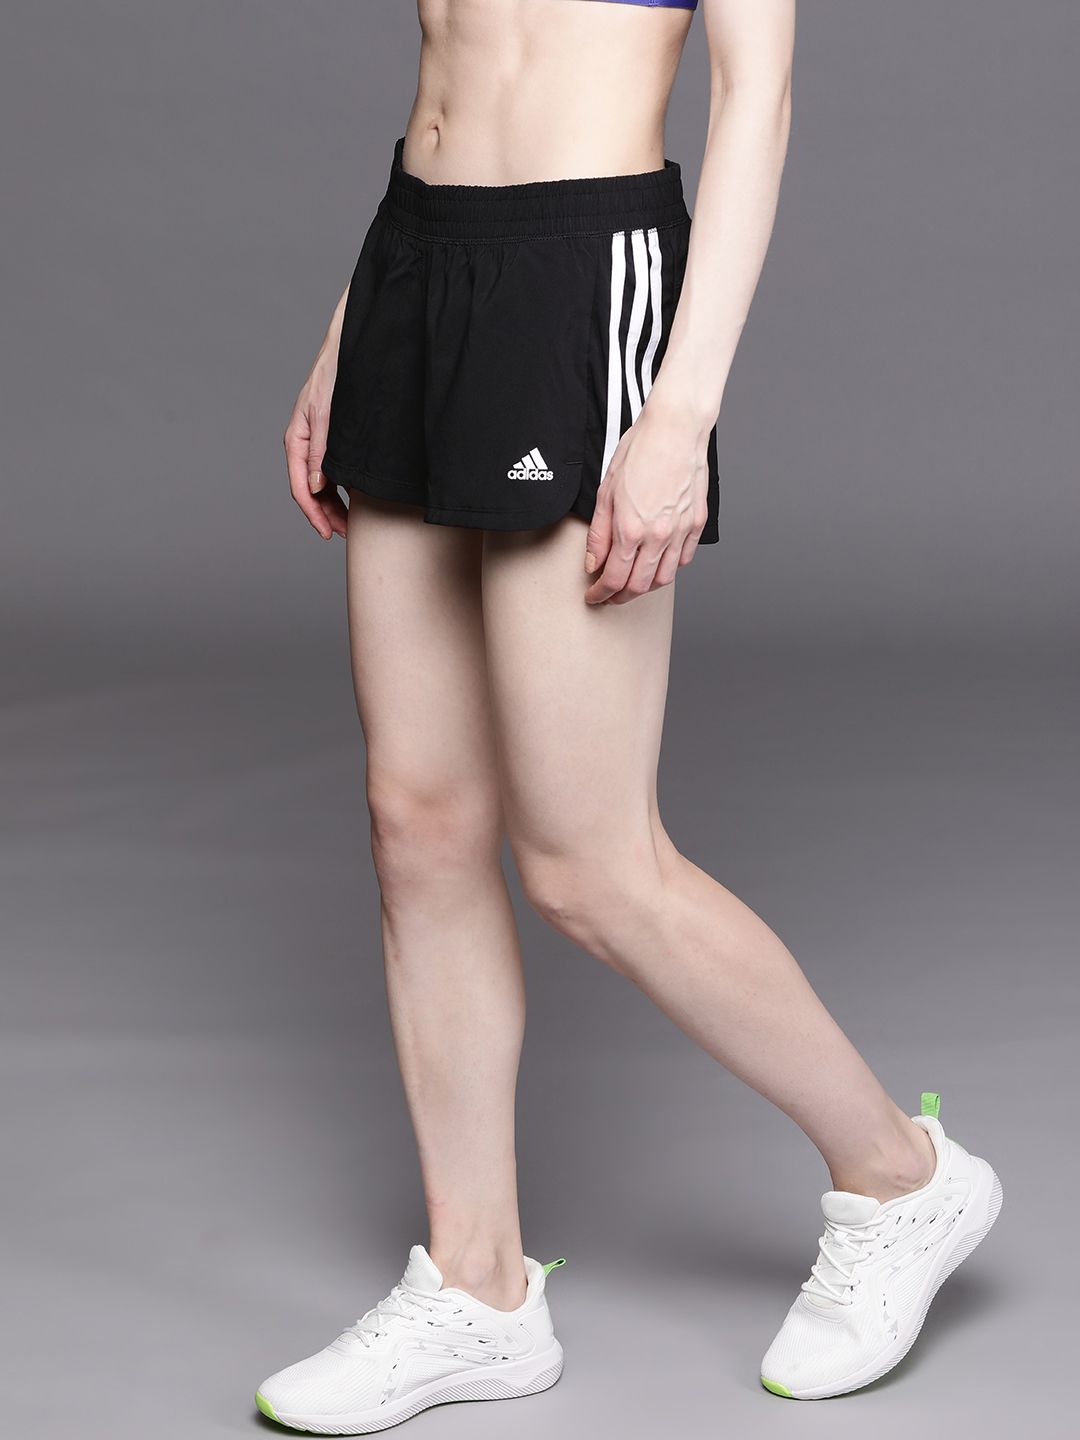 ADIDAS Women Black Pacer 3-Stripes Woven Sports Sustainable Shorts Price in India